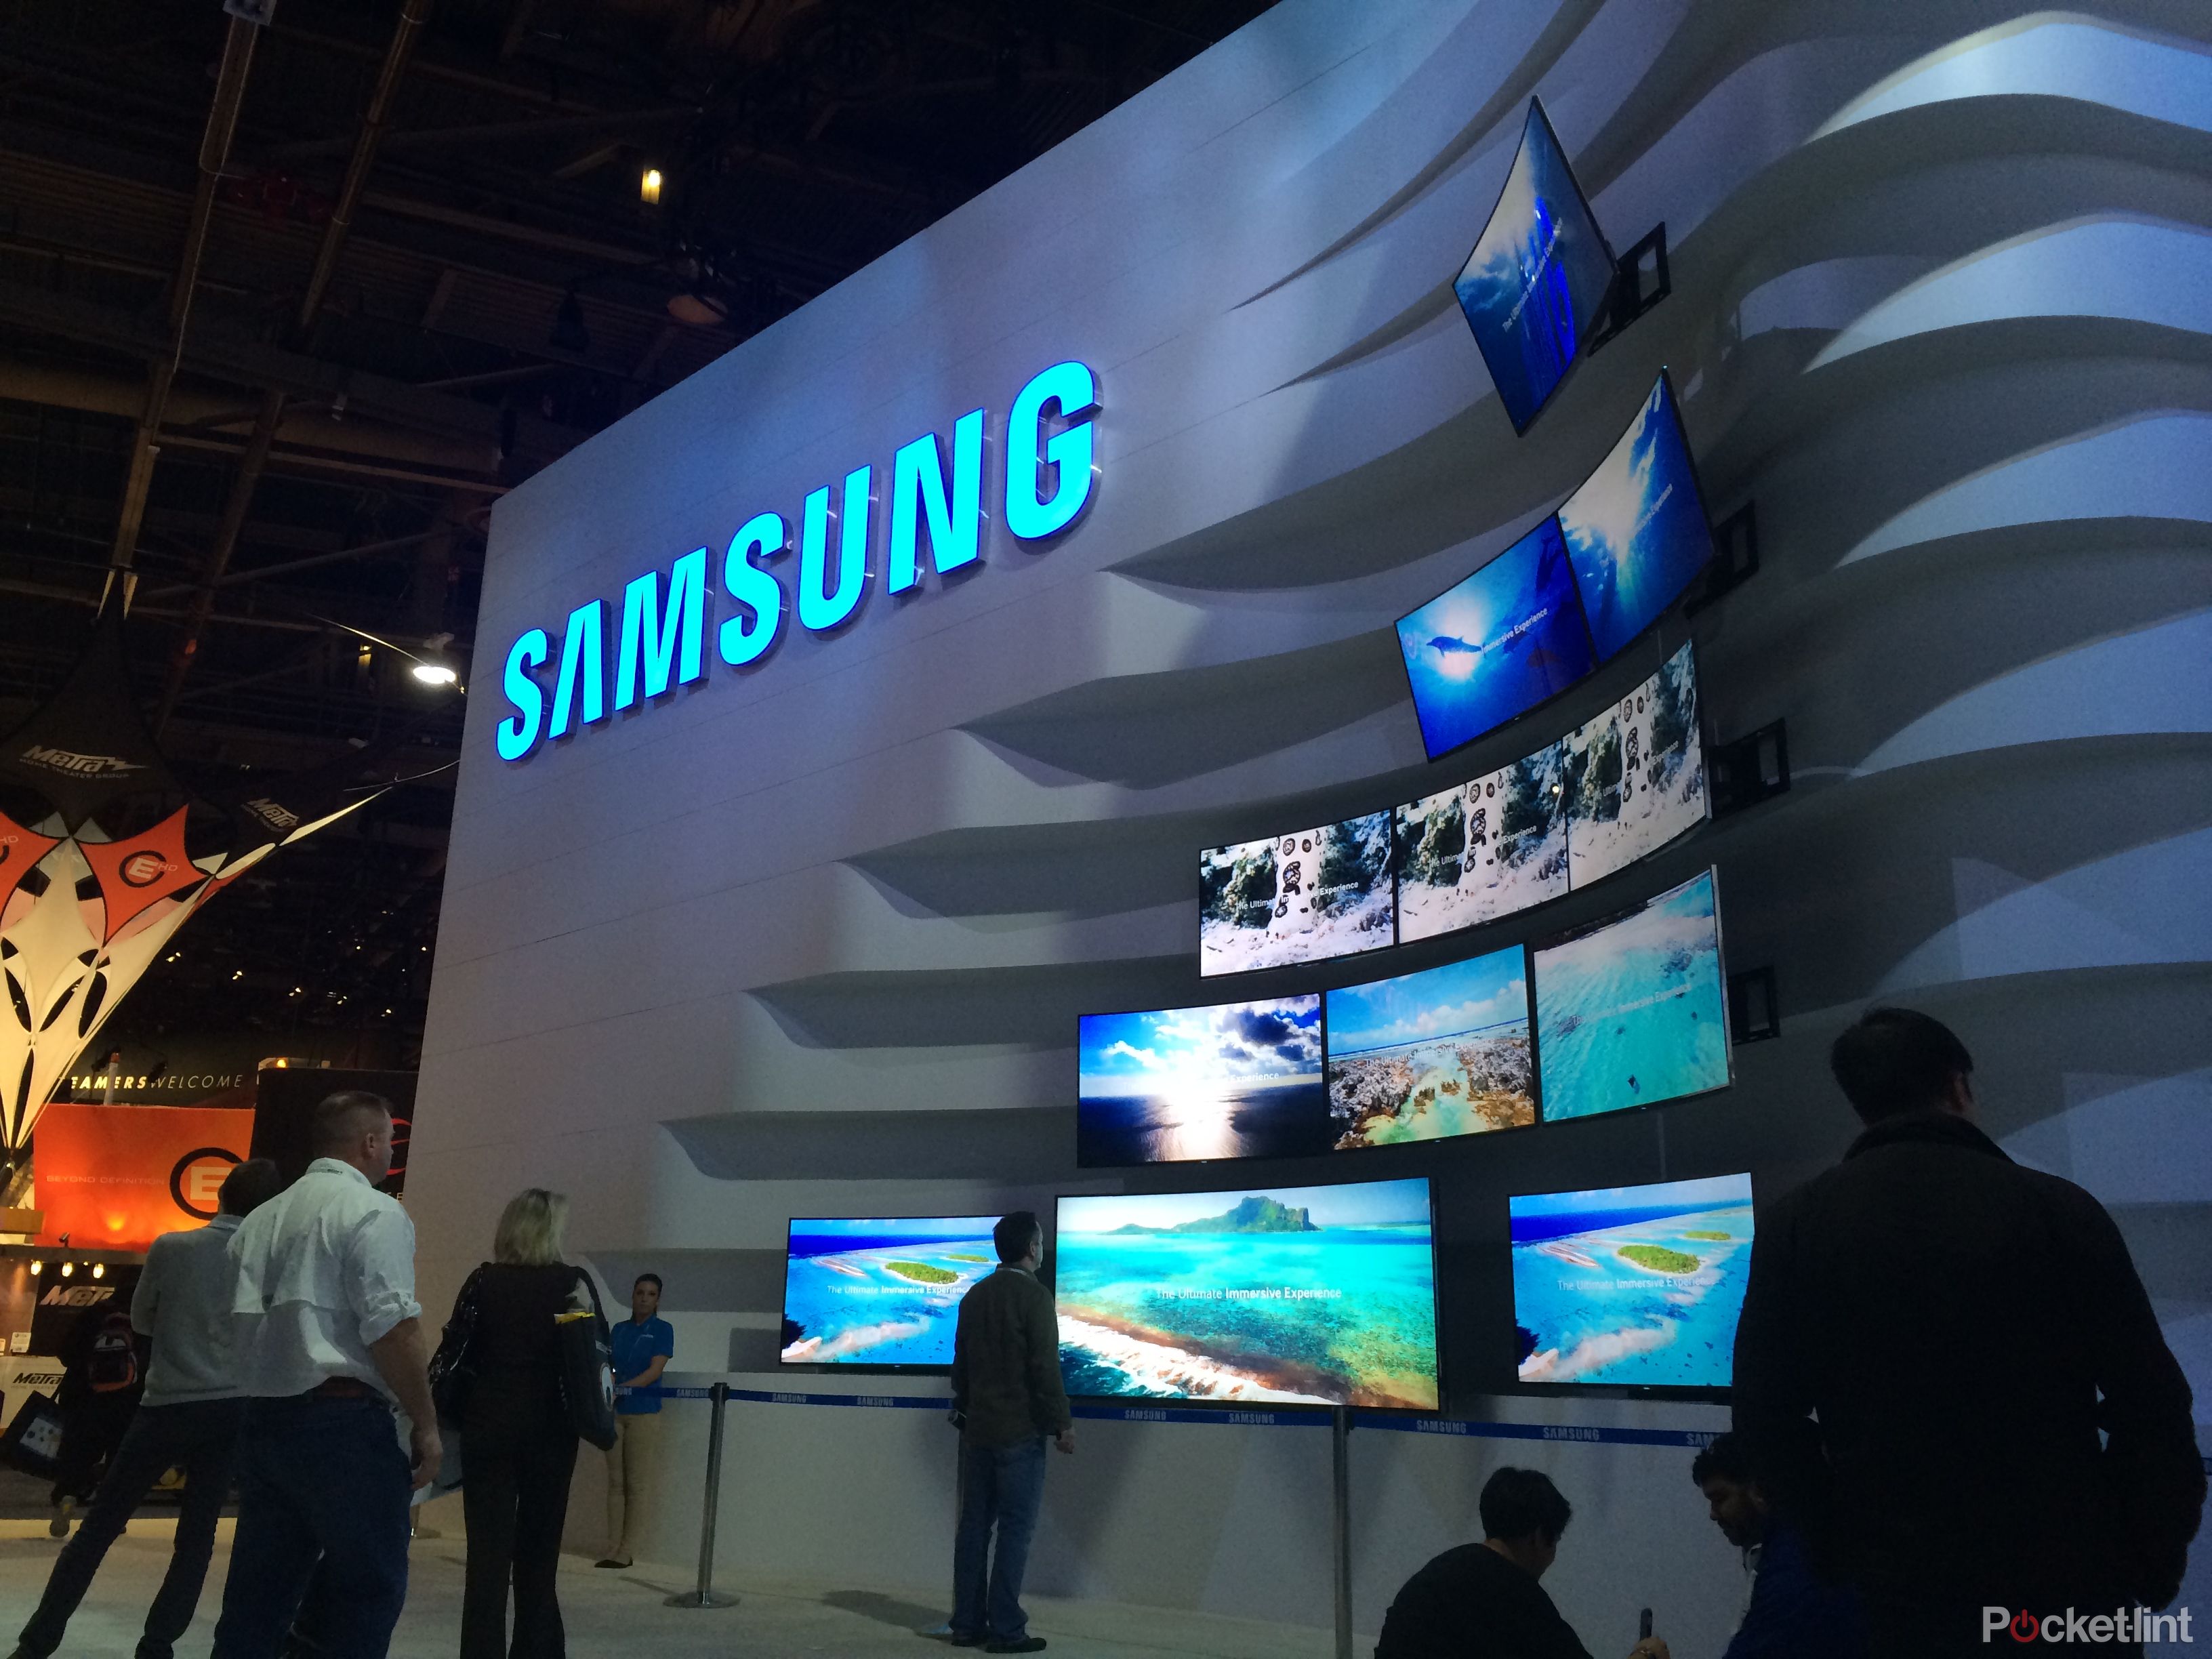 samsung will ship 105 inch curved and 85 inch bendable 4k uhdtvs in latter 2014 image 1